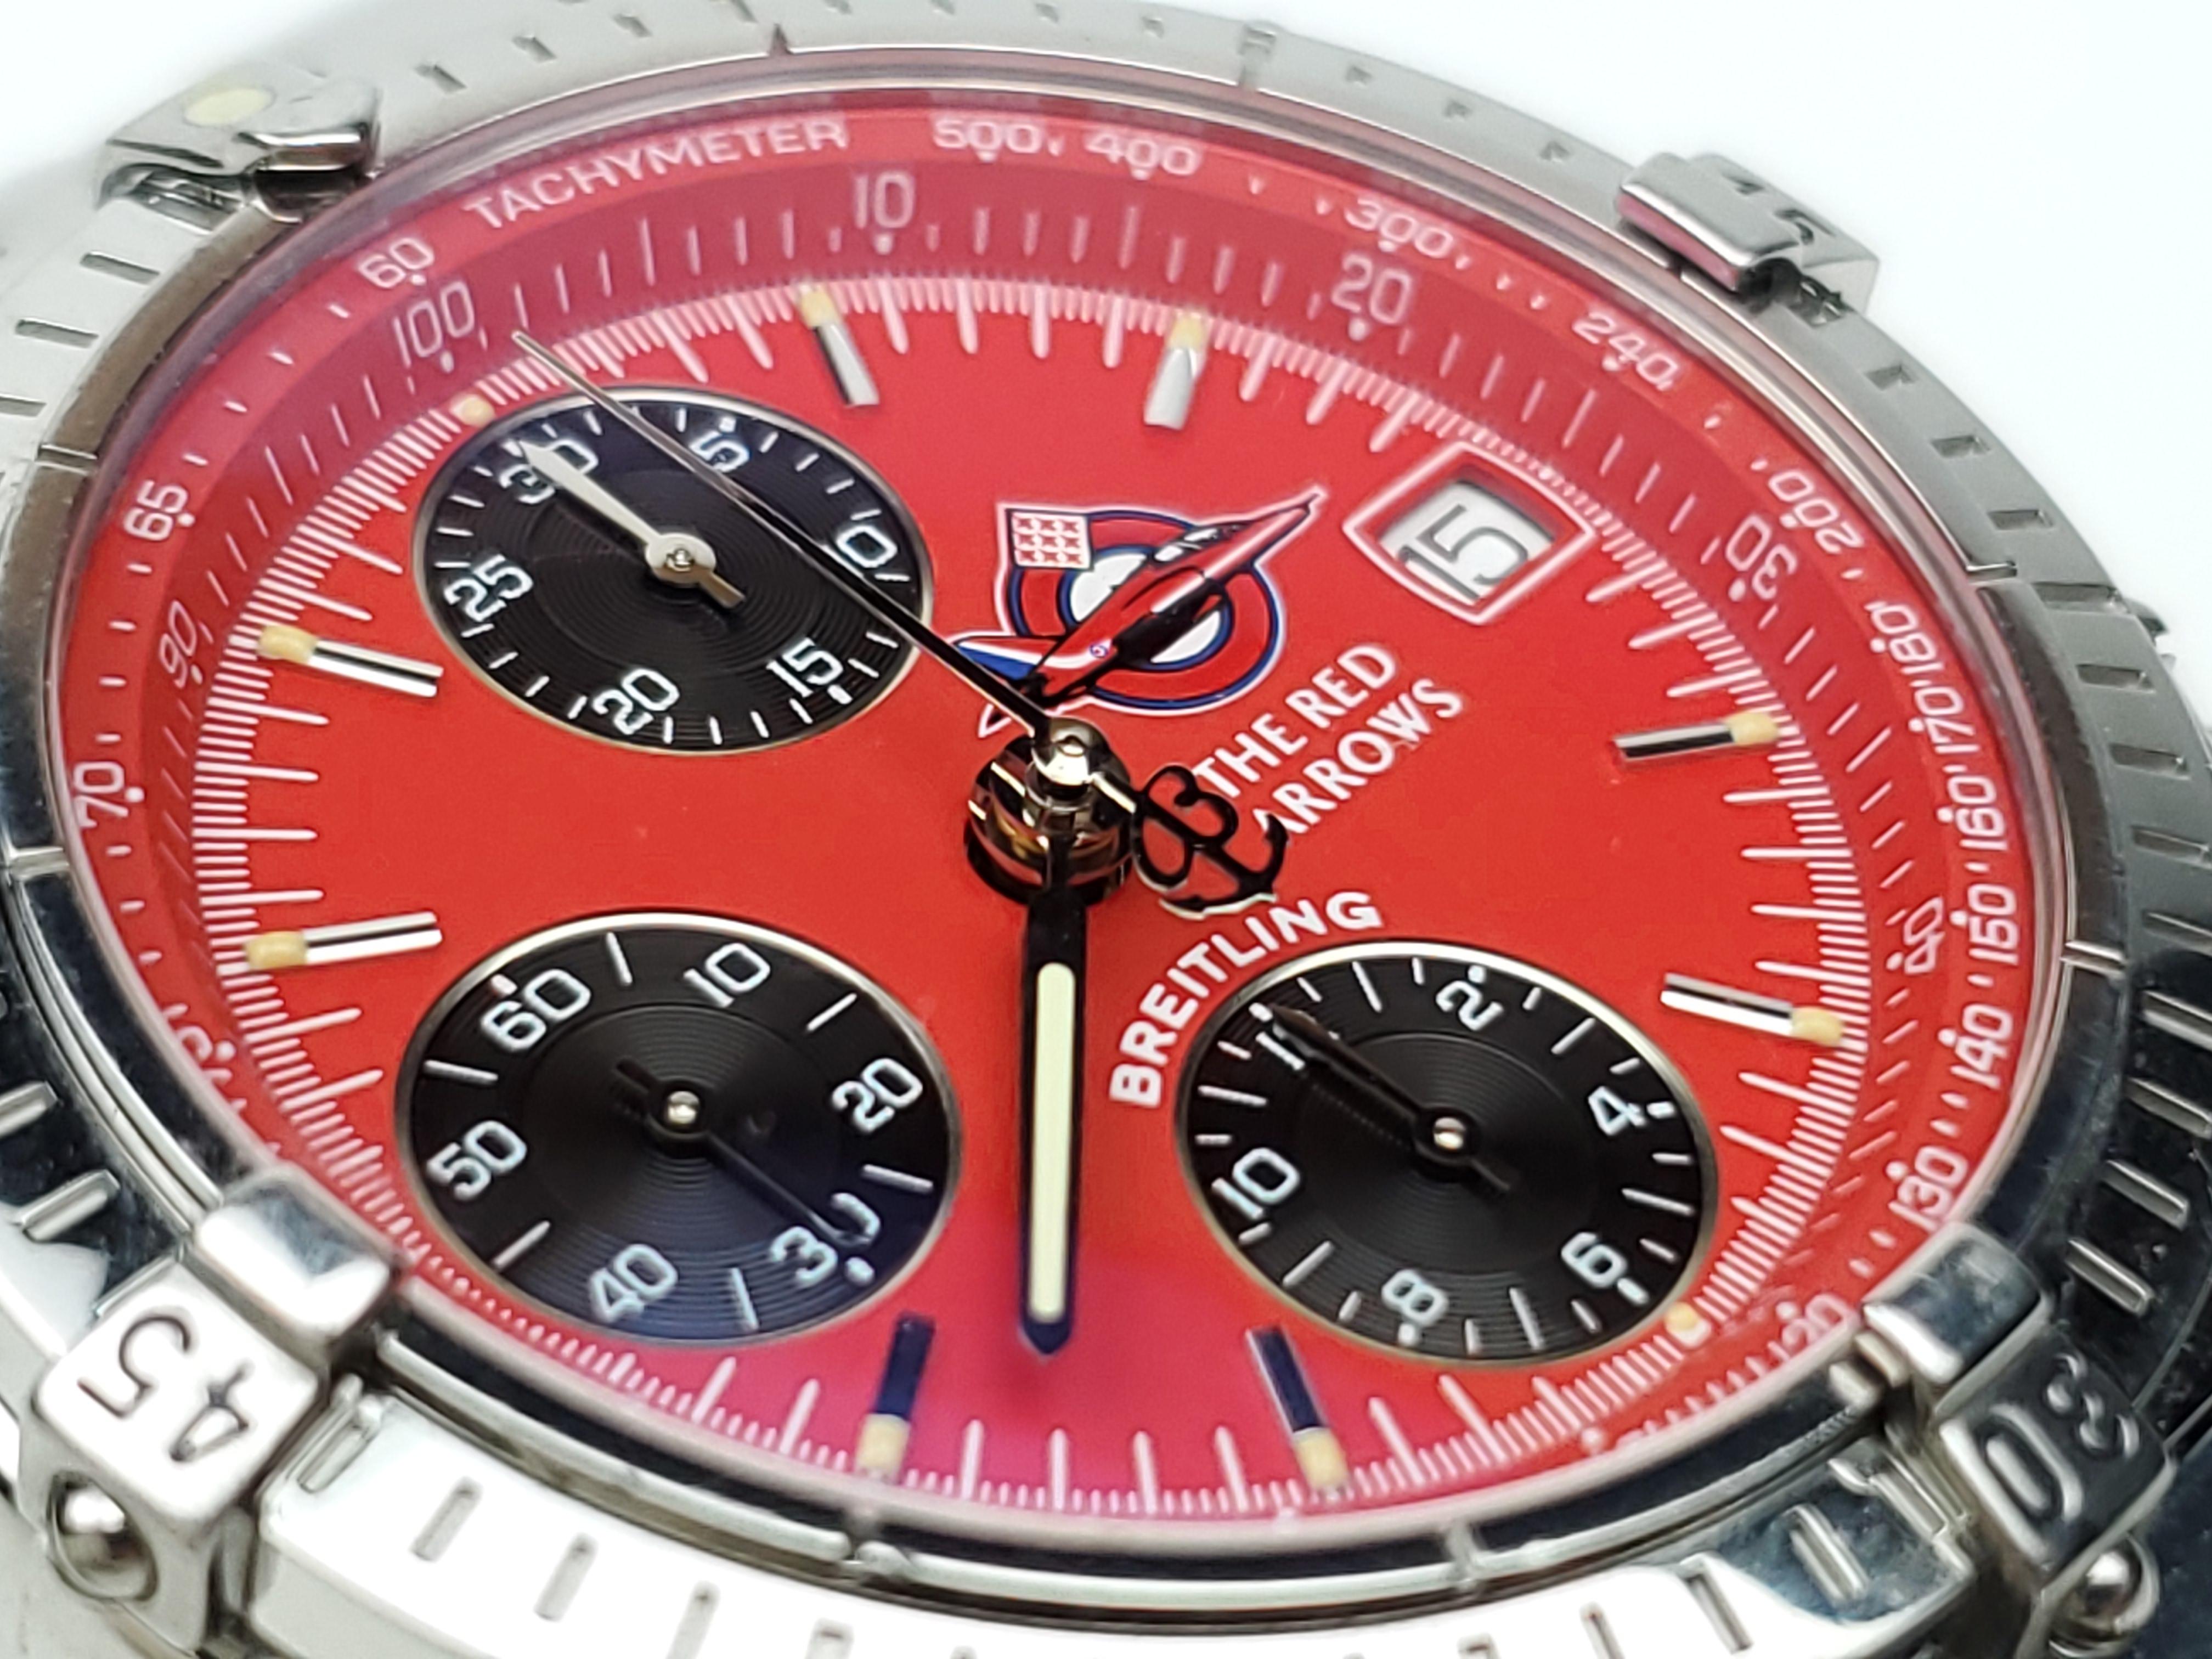 Breitling Chronomat Red Arrows Limited Edition Stainless Steel Wristwatch 3